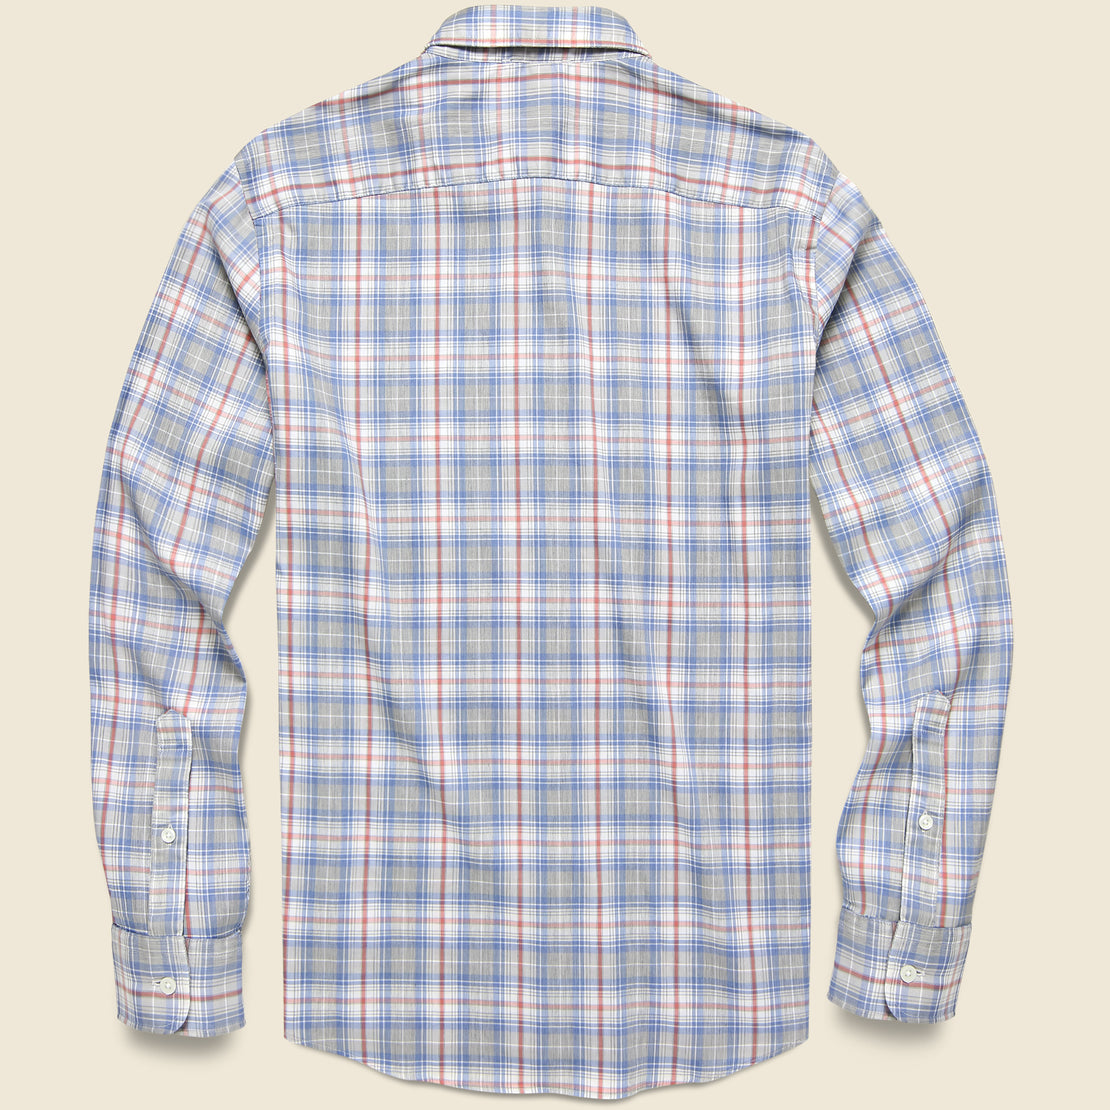 Movement Shirt - Marin Coast Plaid - Faherty - STAG Provisions - Tops - L/S Woven - Plaid